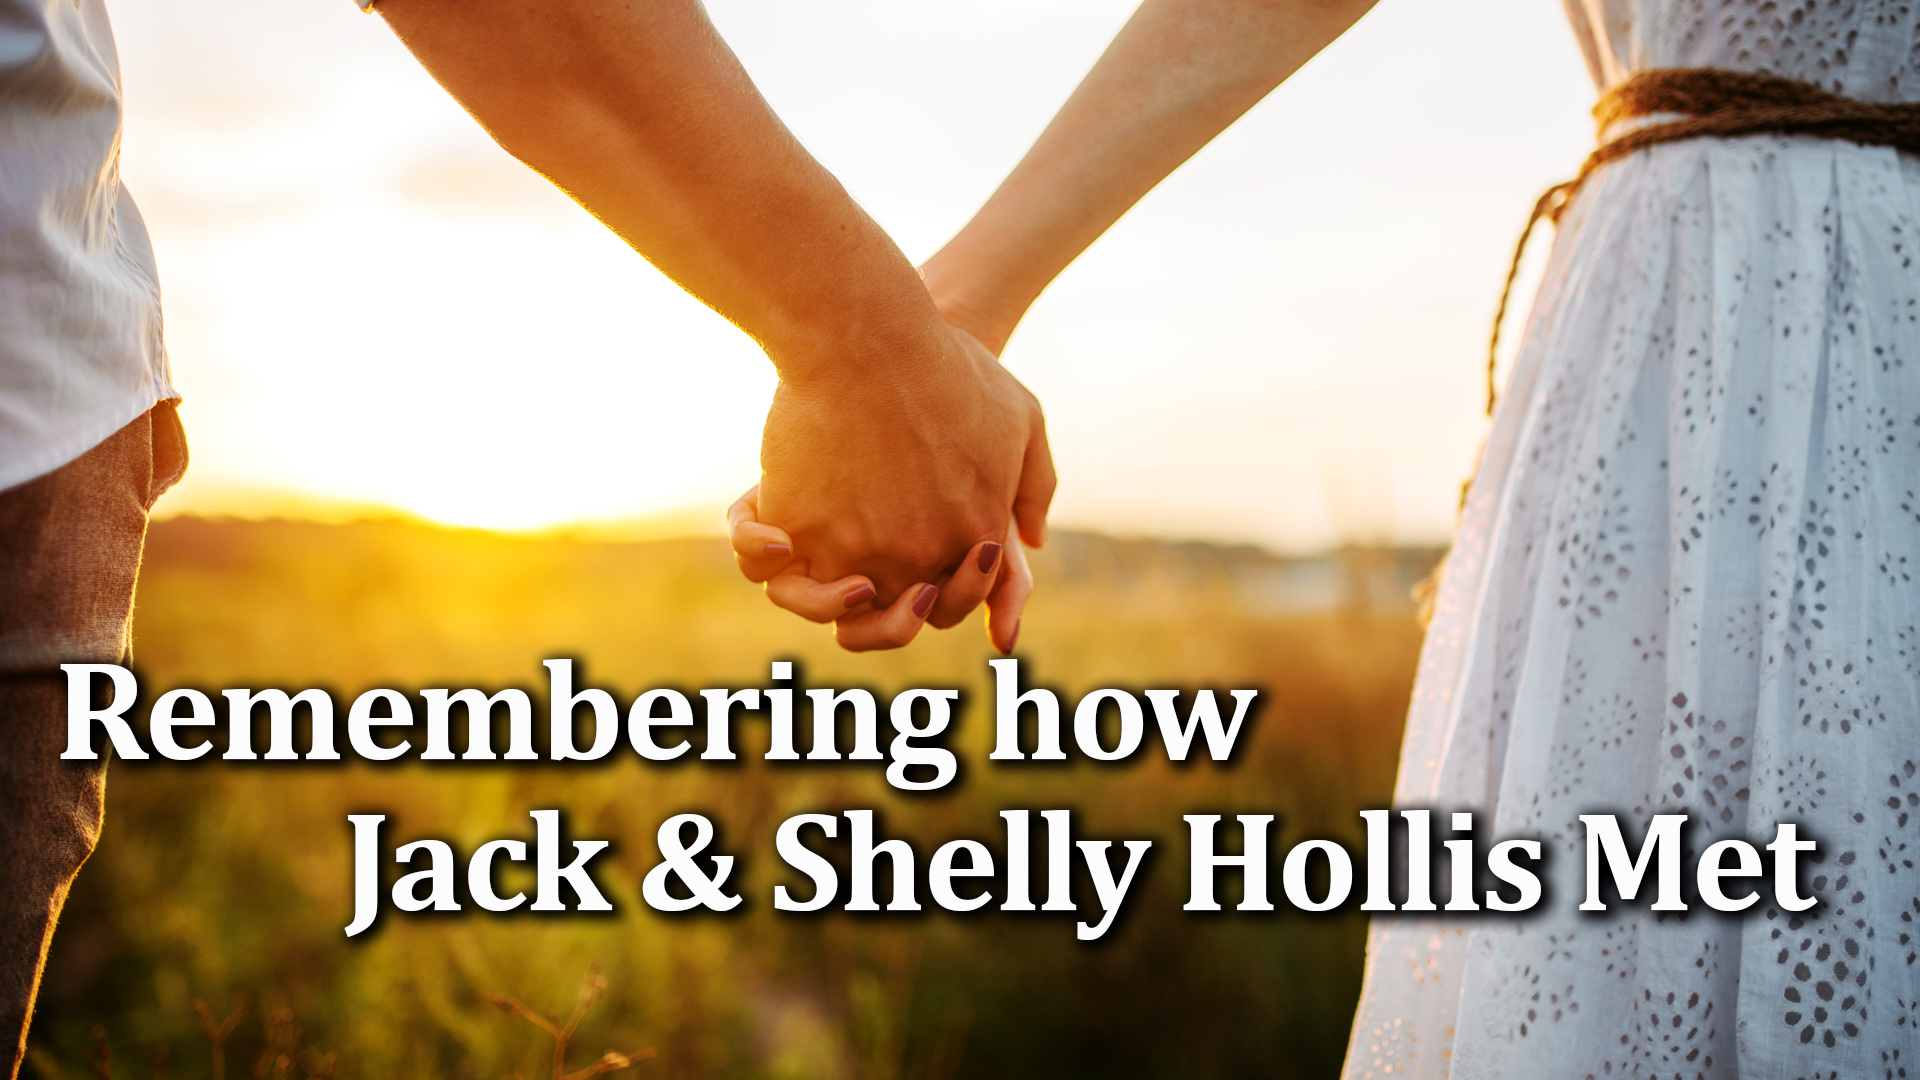 11-23-21 Remembering How Jack and Shelly Hollis met